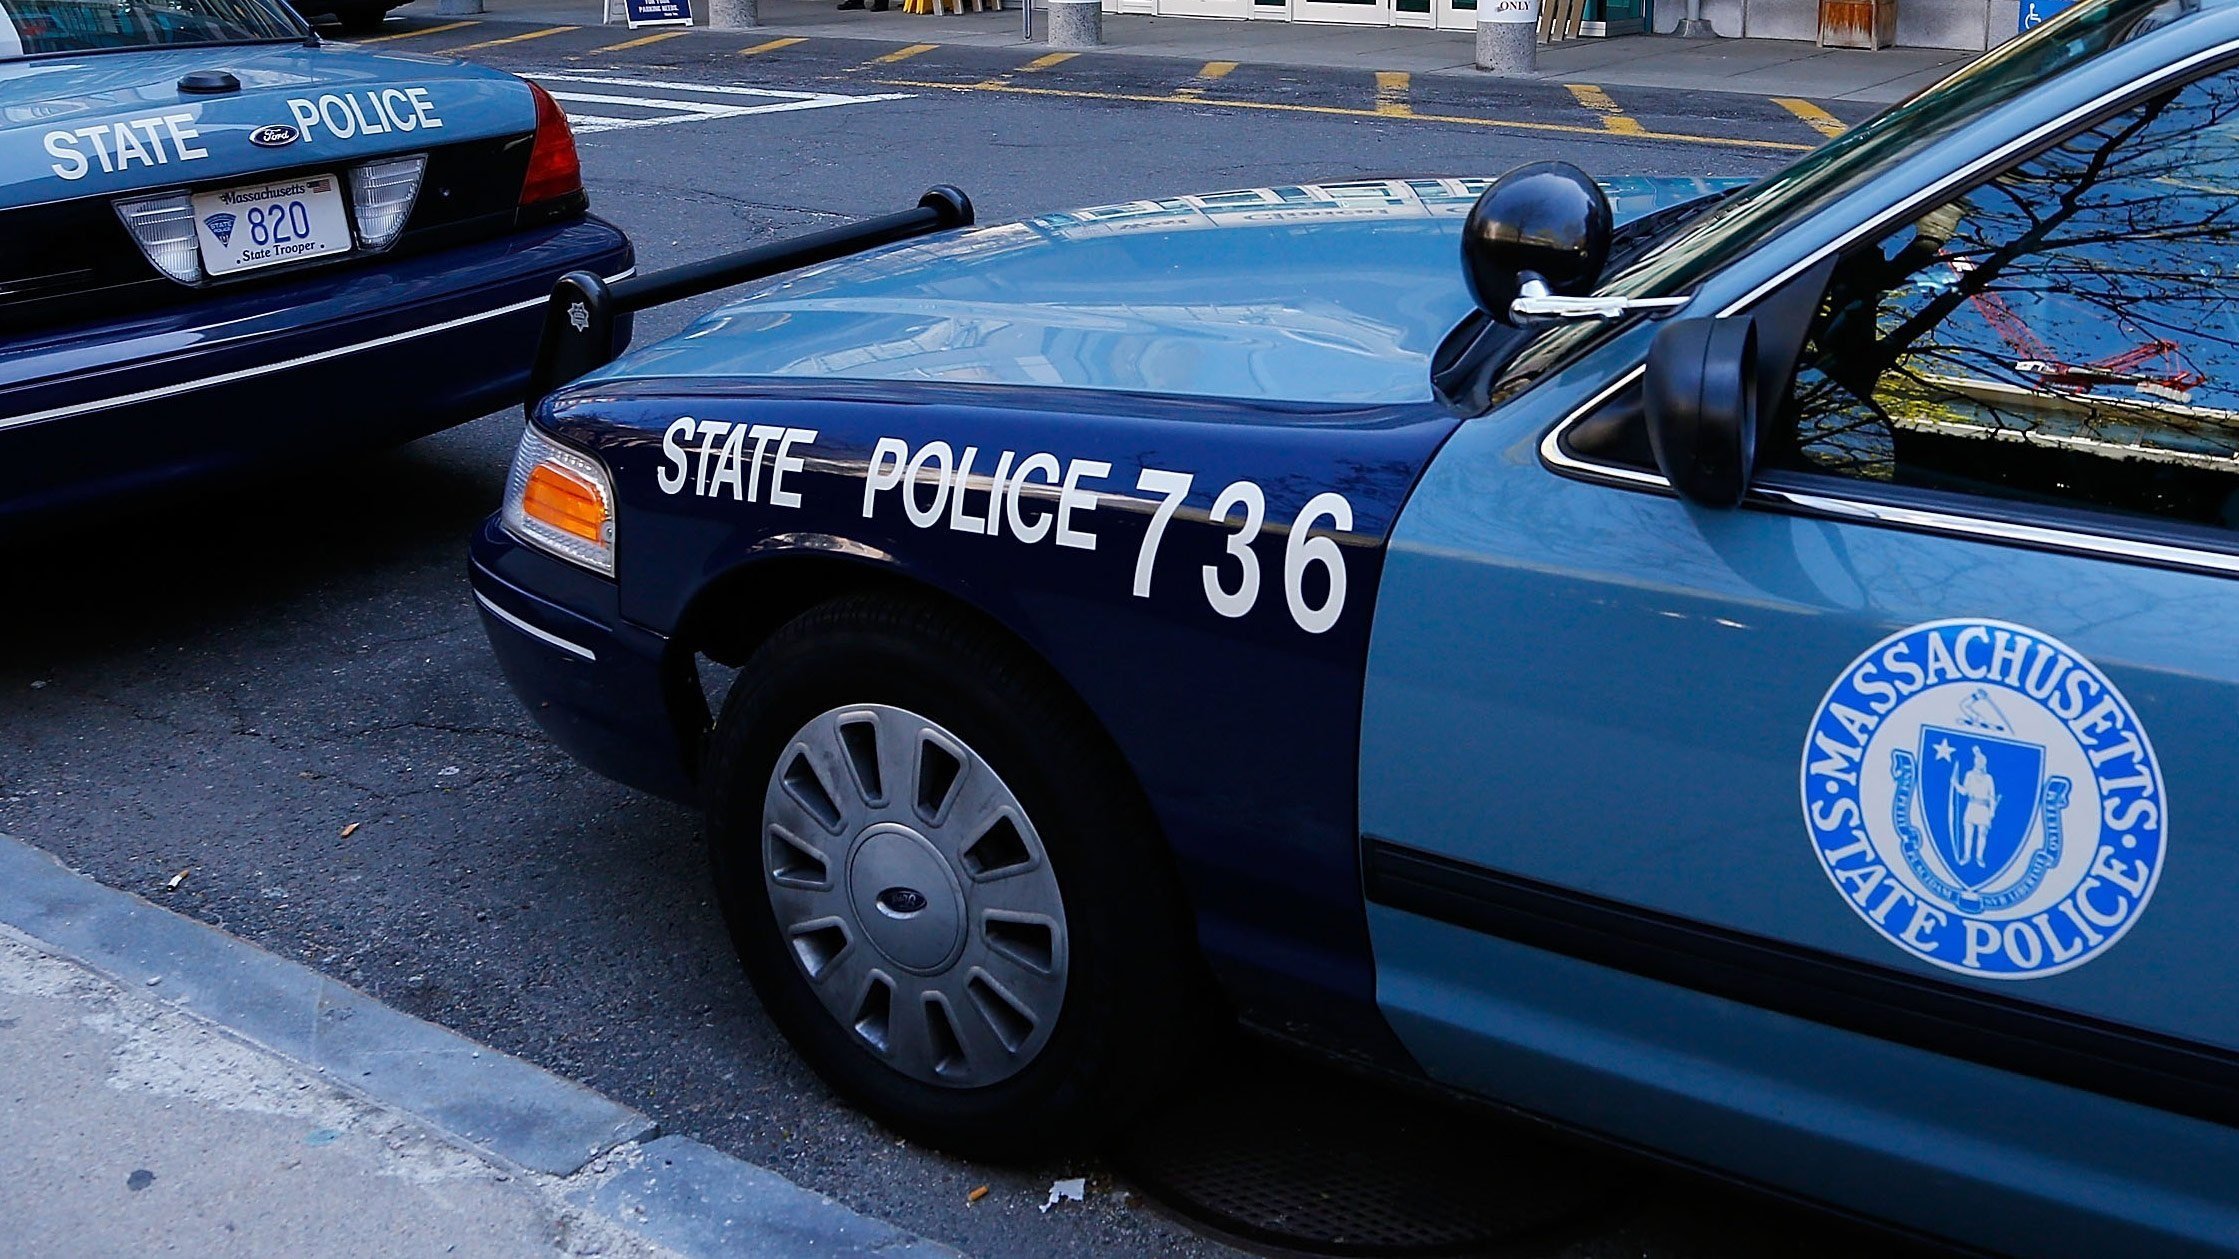 Massachusetts state police investigate trooper accused of racist posts